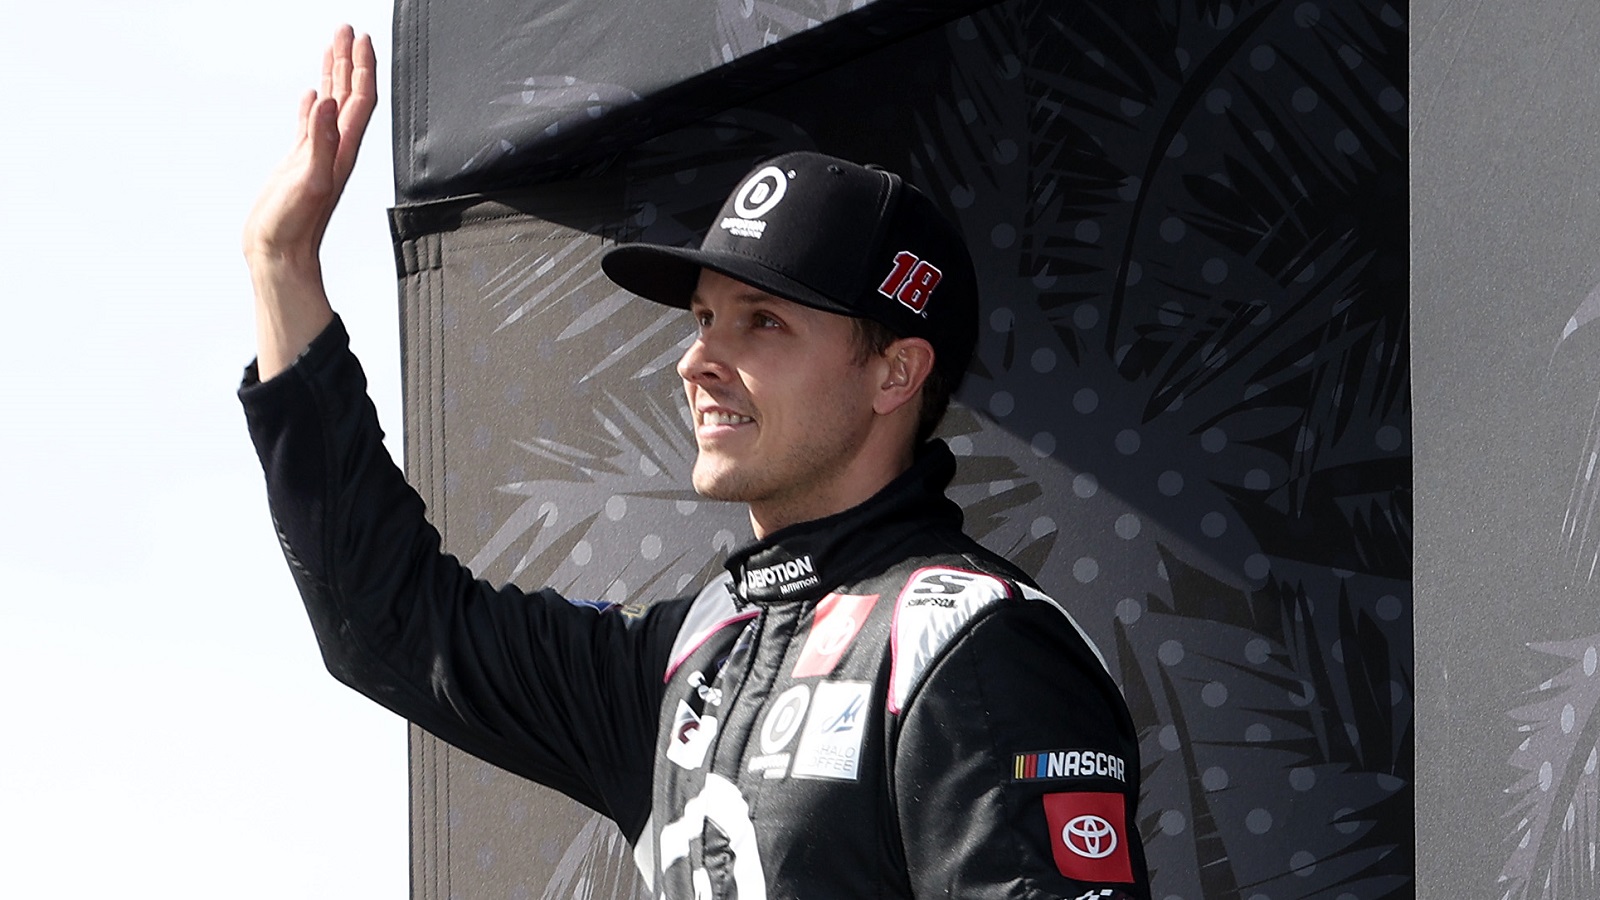 Trevor Bayne is back in the Xfinity Series this season. He shocked the NASCAR world by winning the Daytona 500 in 2011,  | James Gilbert/Getty Images